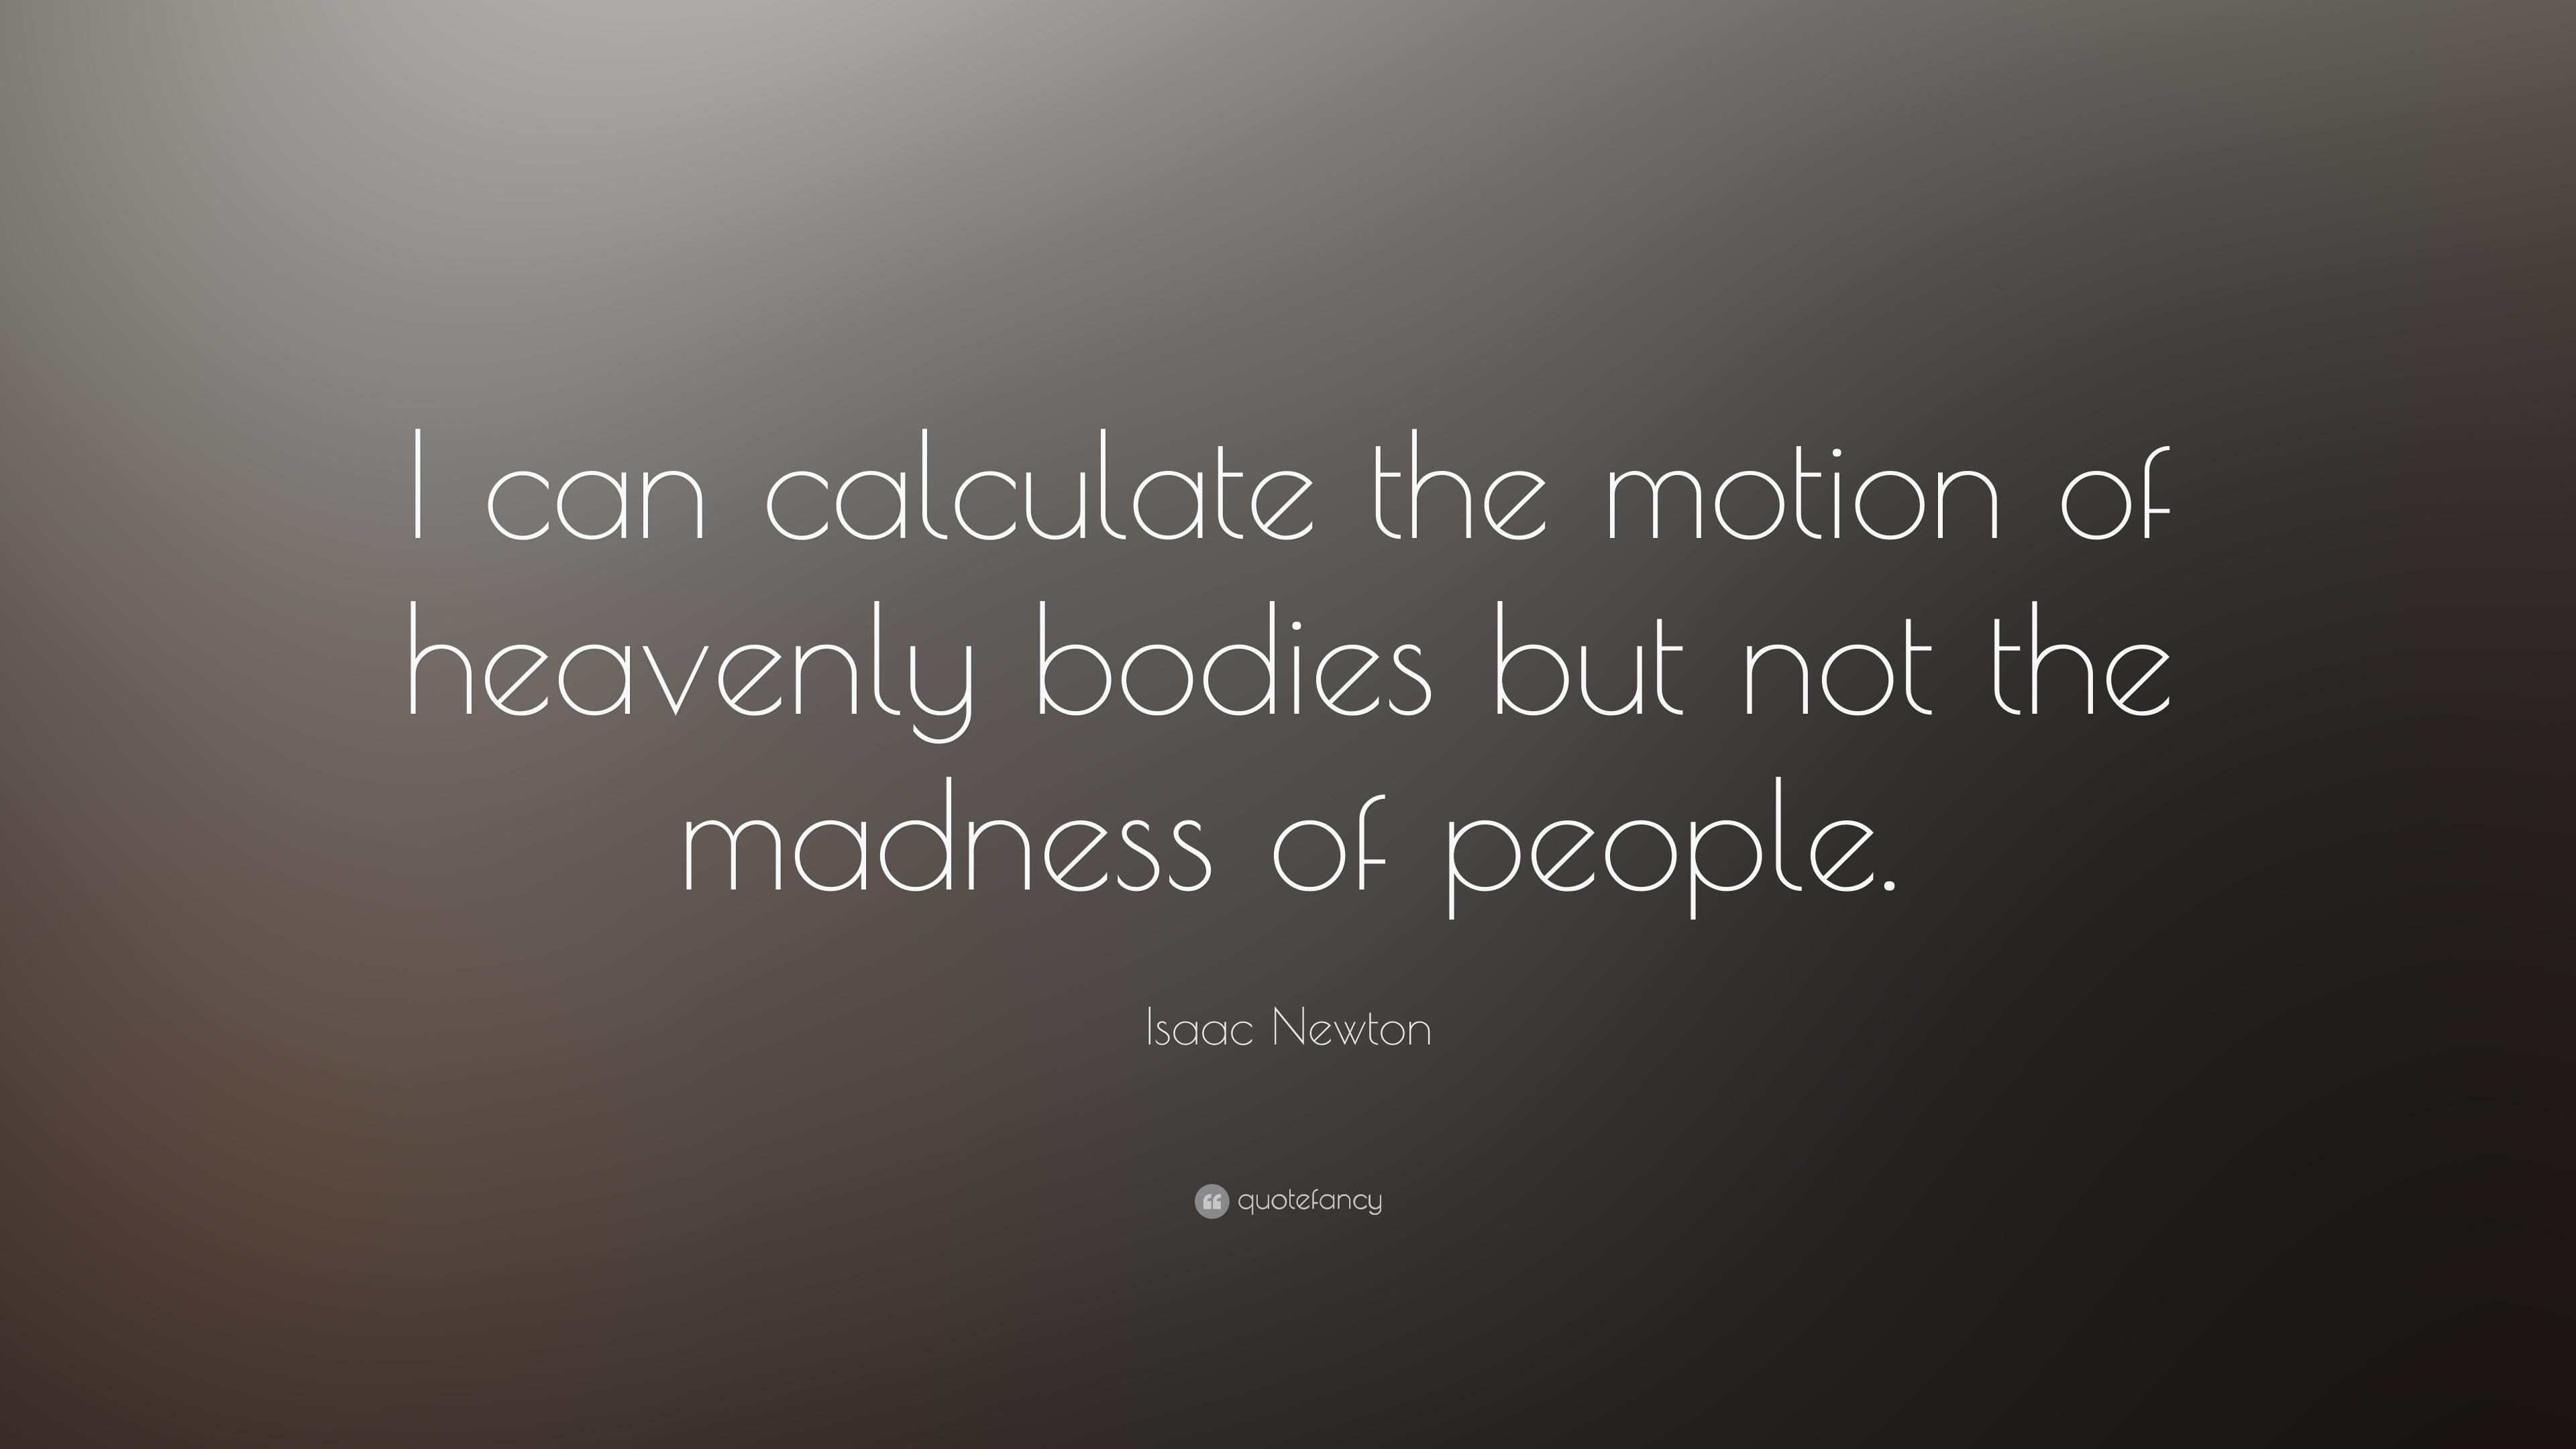 Isaac Newton Quote: “I can calculate the motion of heavenly bodies